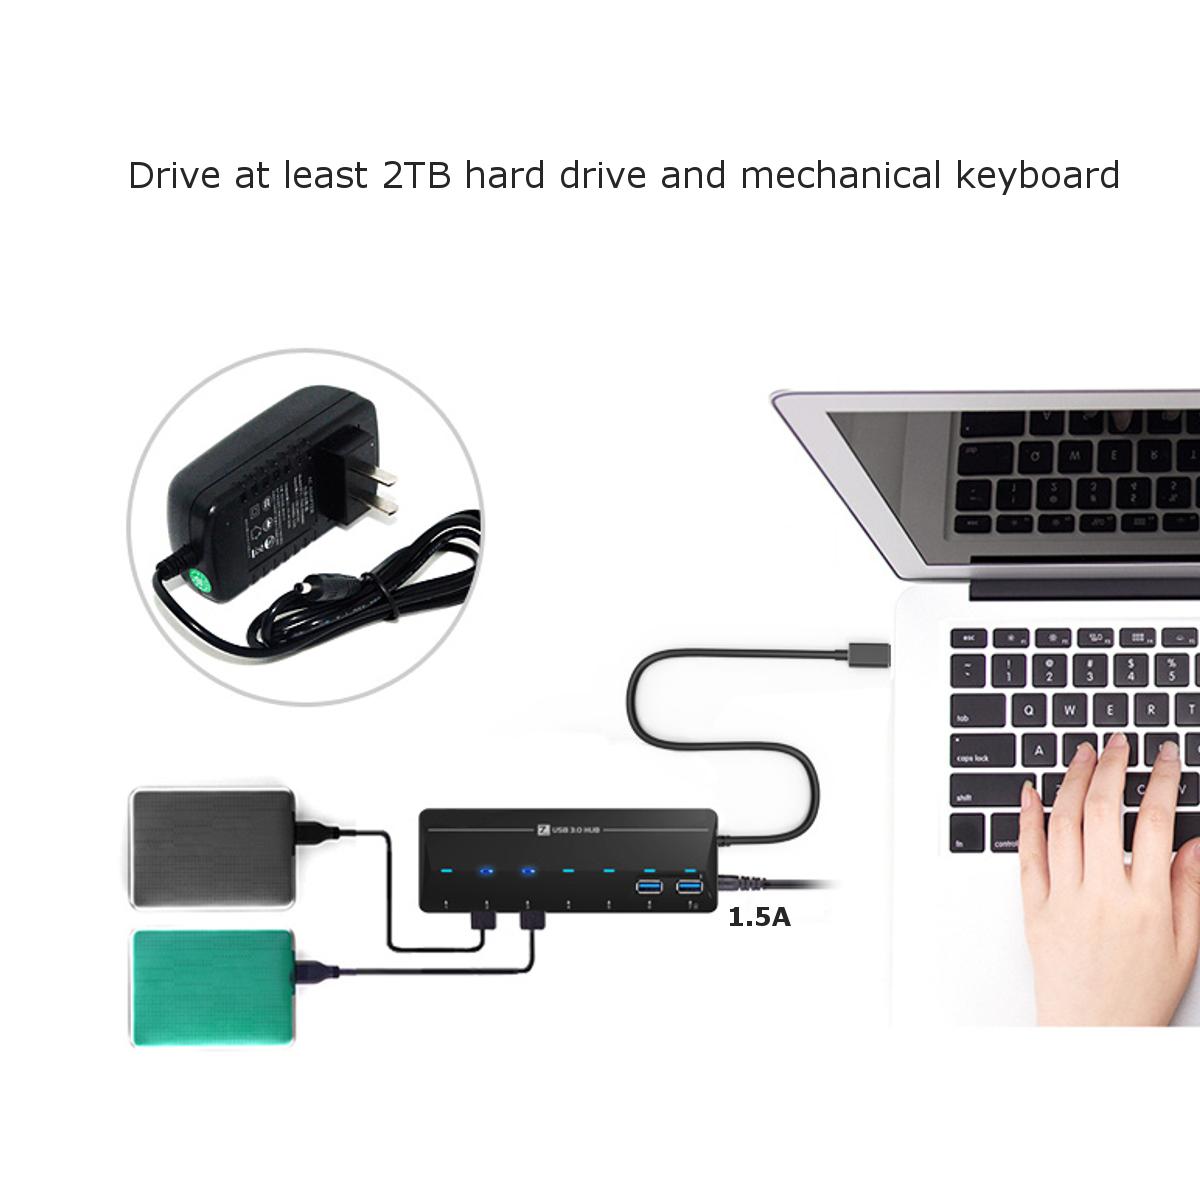 High Speed USB 3.0 7 Ports Hub with 1.5A Quick Charge Port 11